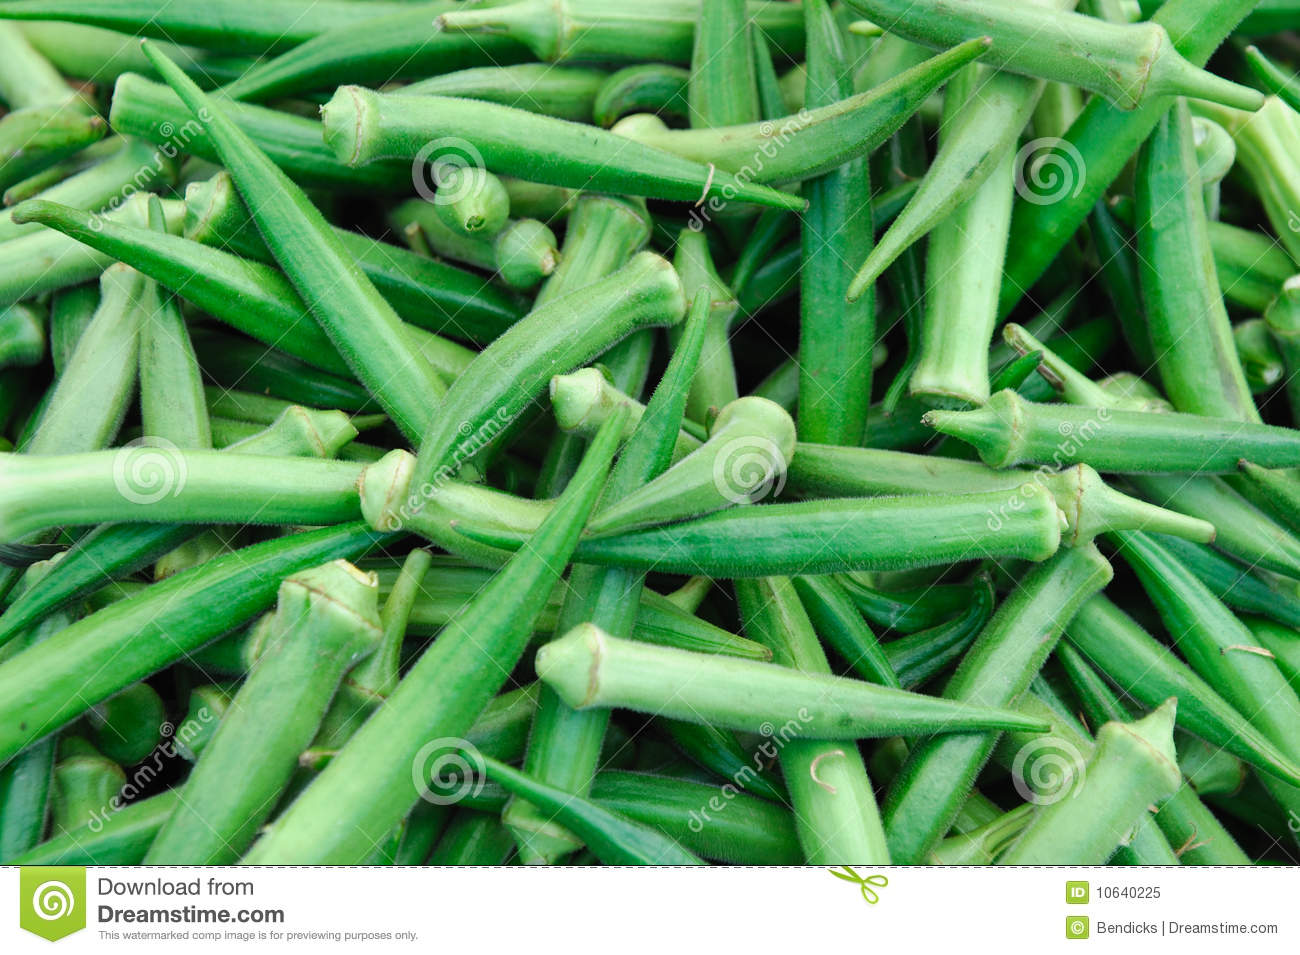 Large Pile Of Fresh Picked Green Okra Displayed At A Farmers Market 